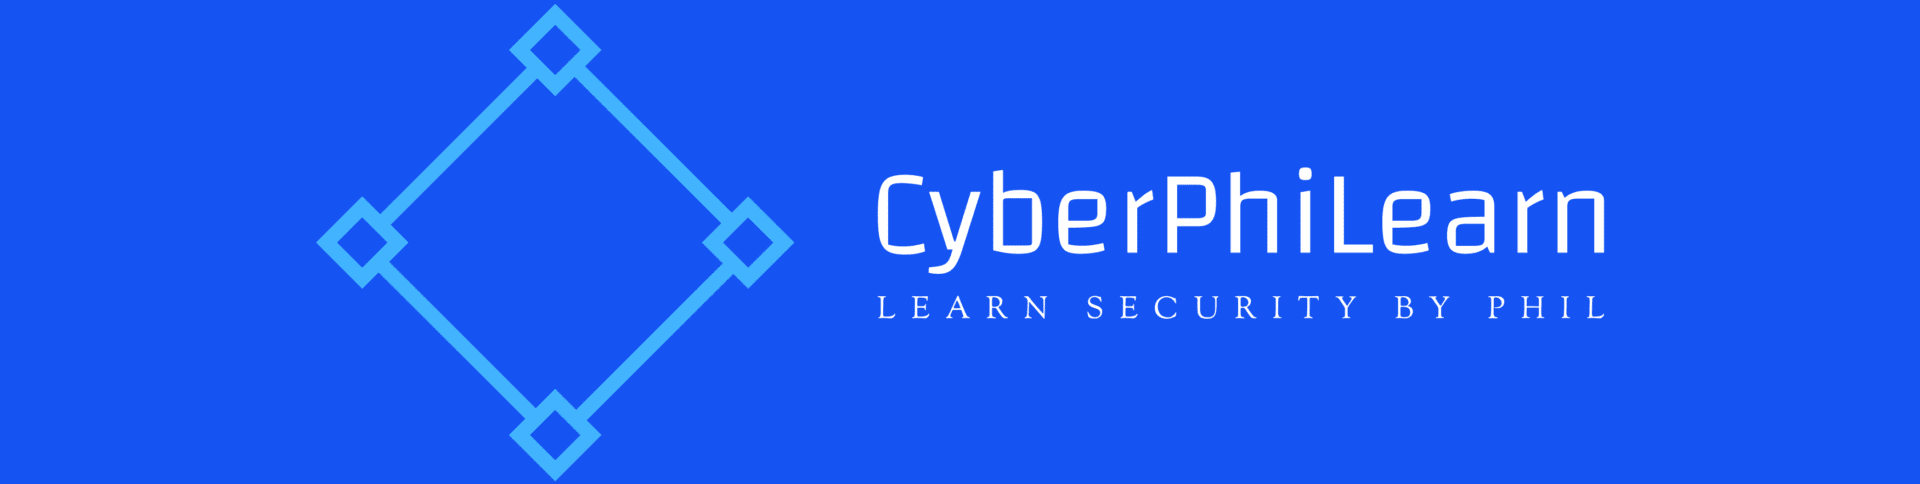 CyberSecurity Learning by Phil